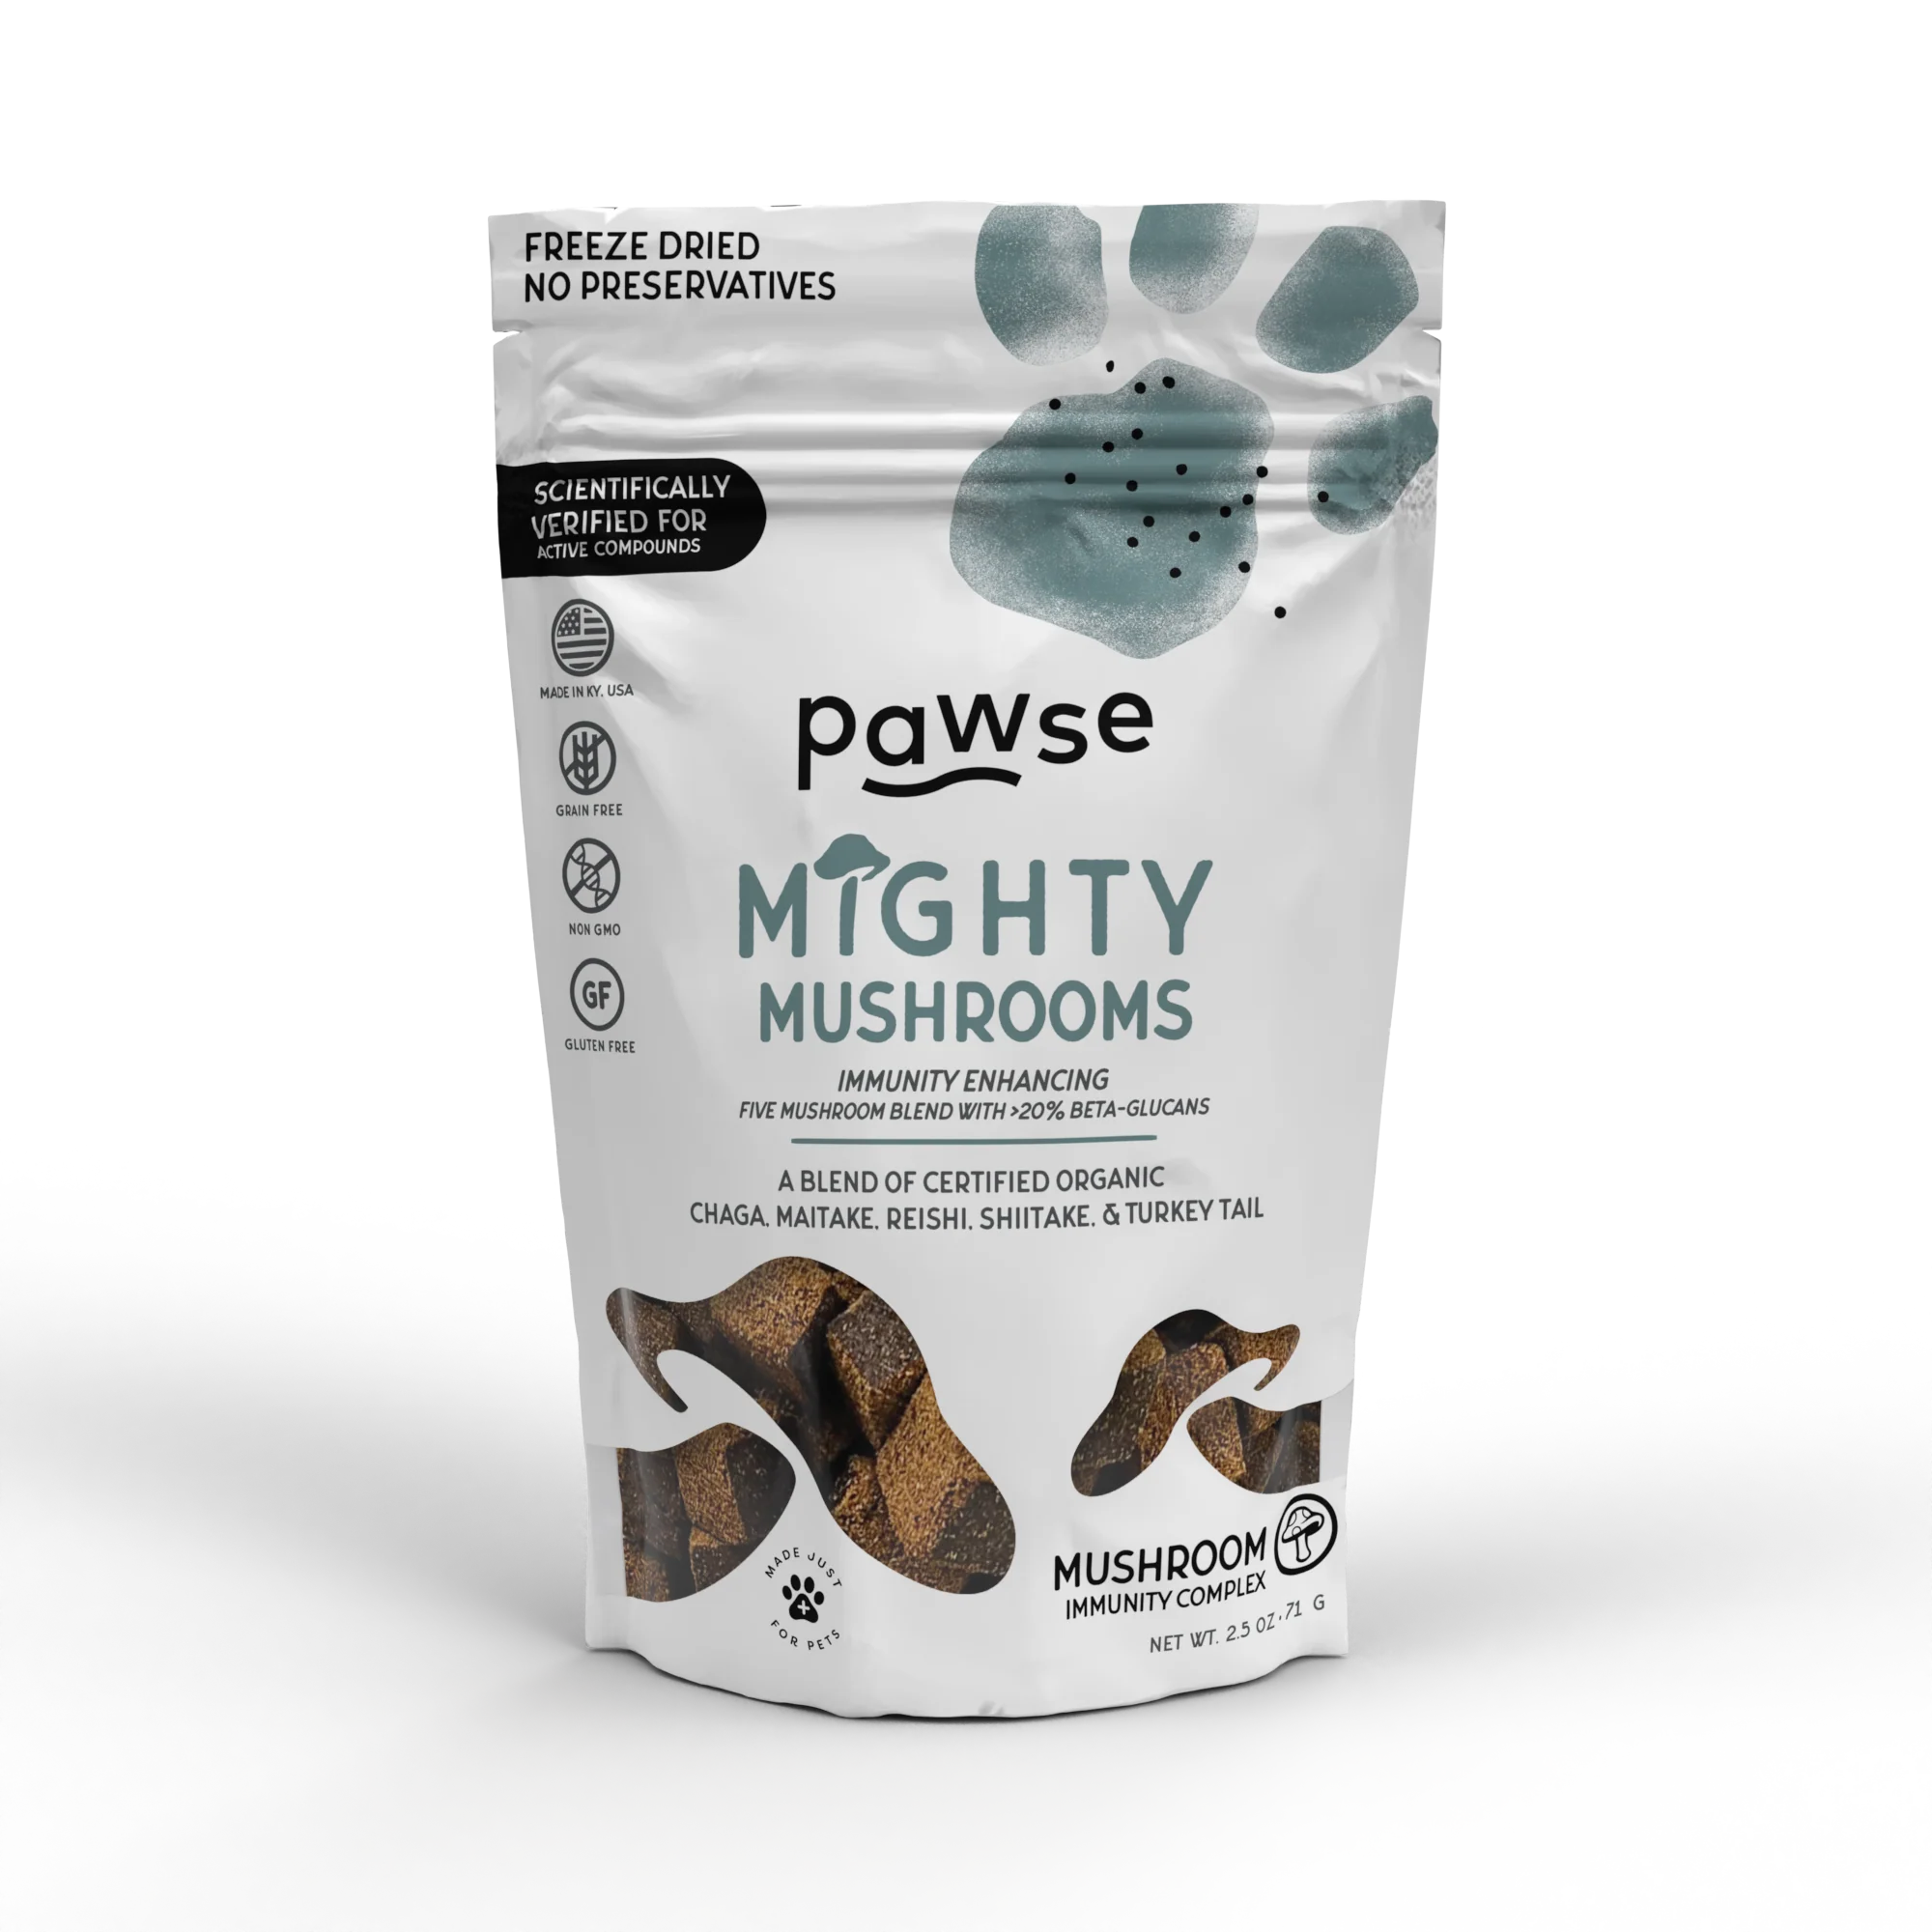 Pawse Mighty Mushrooms | Immune Boosting Mushrooms for Pets